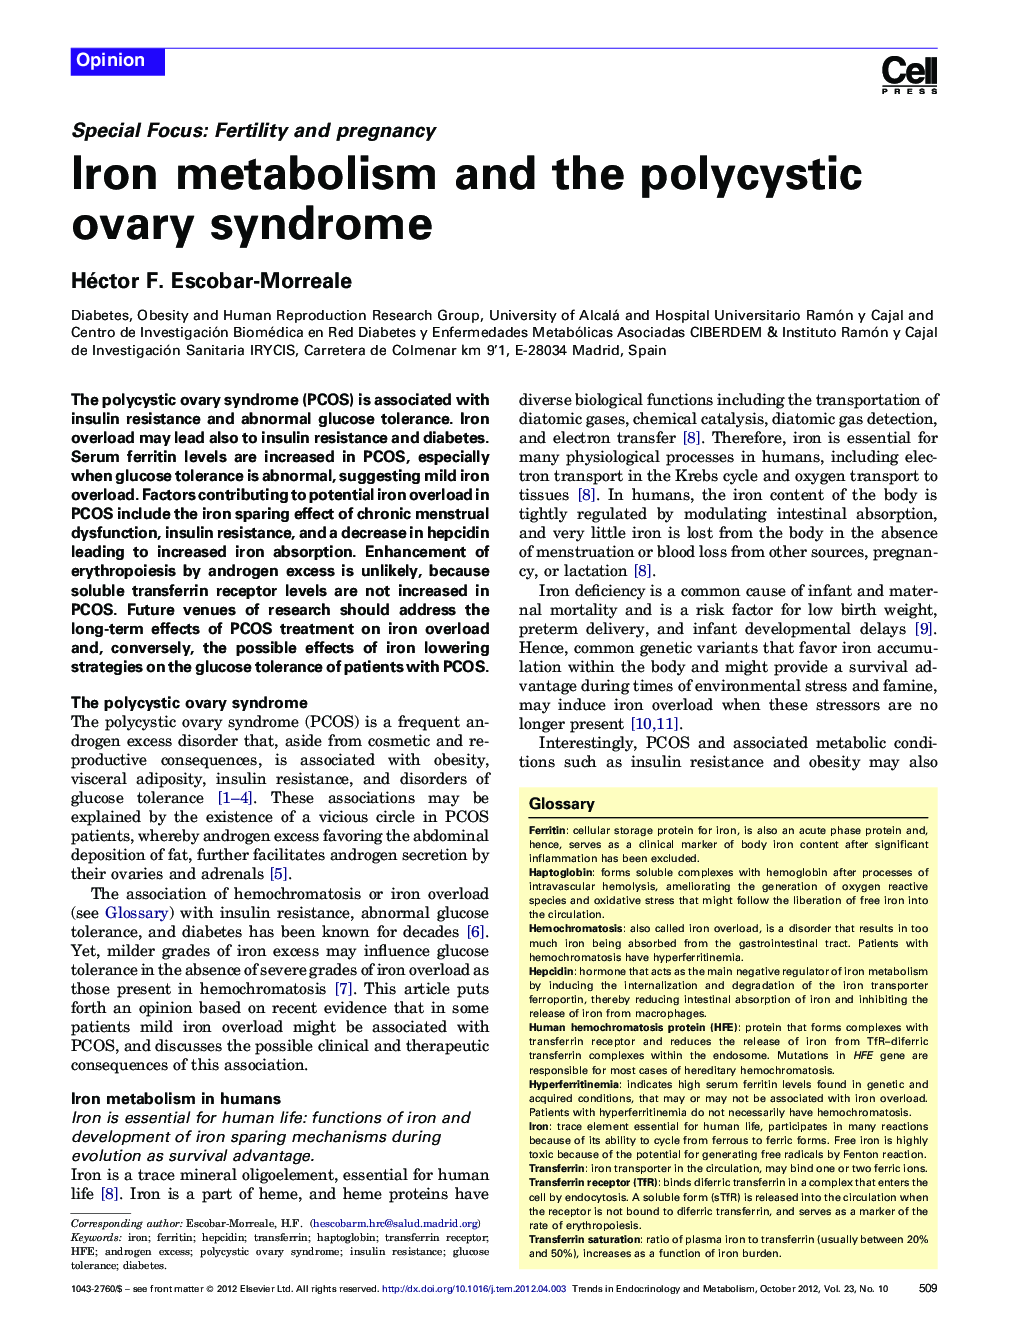 Iron metabolism and the polycystic ovary syndrome